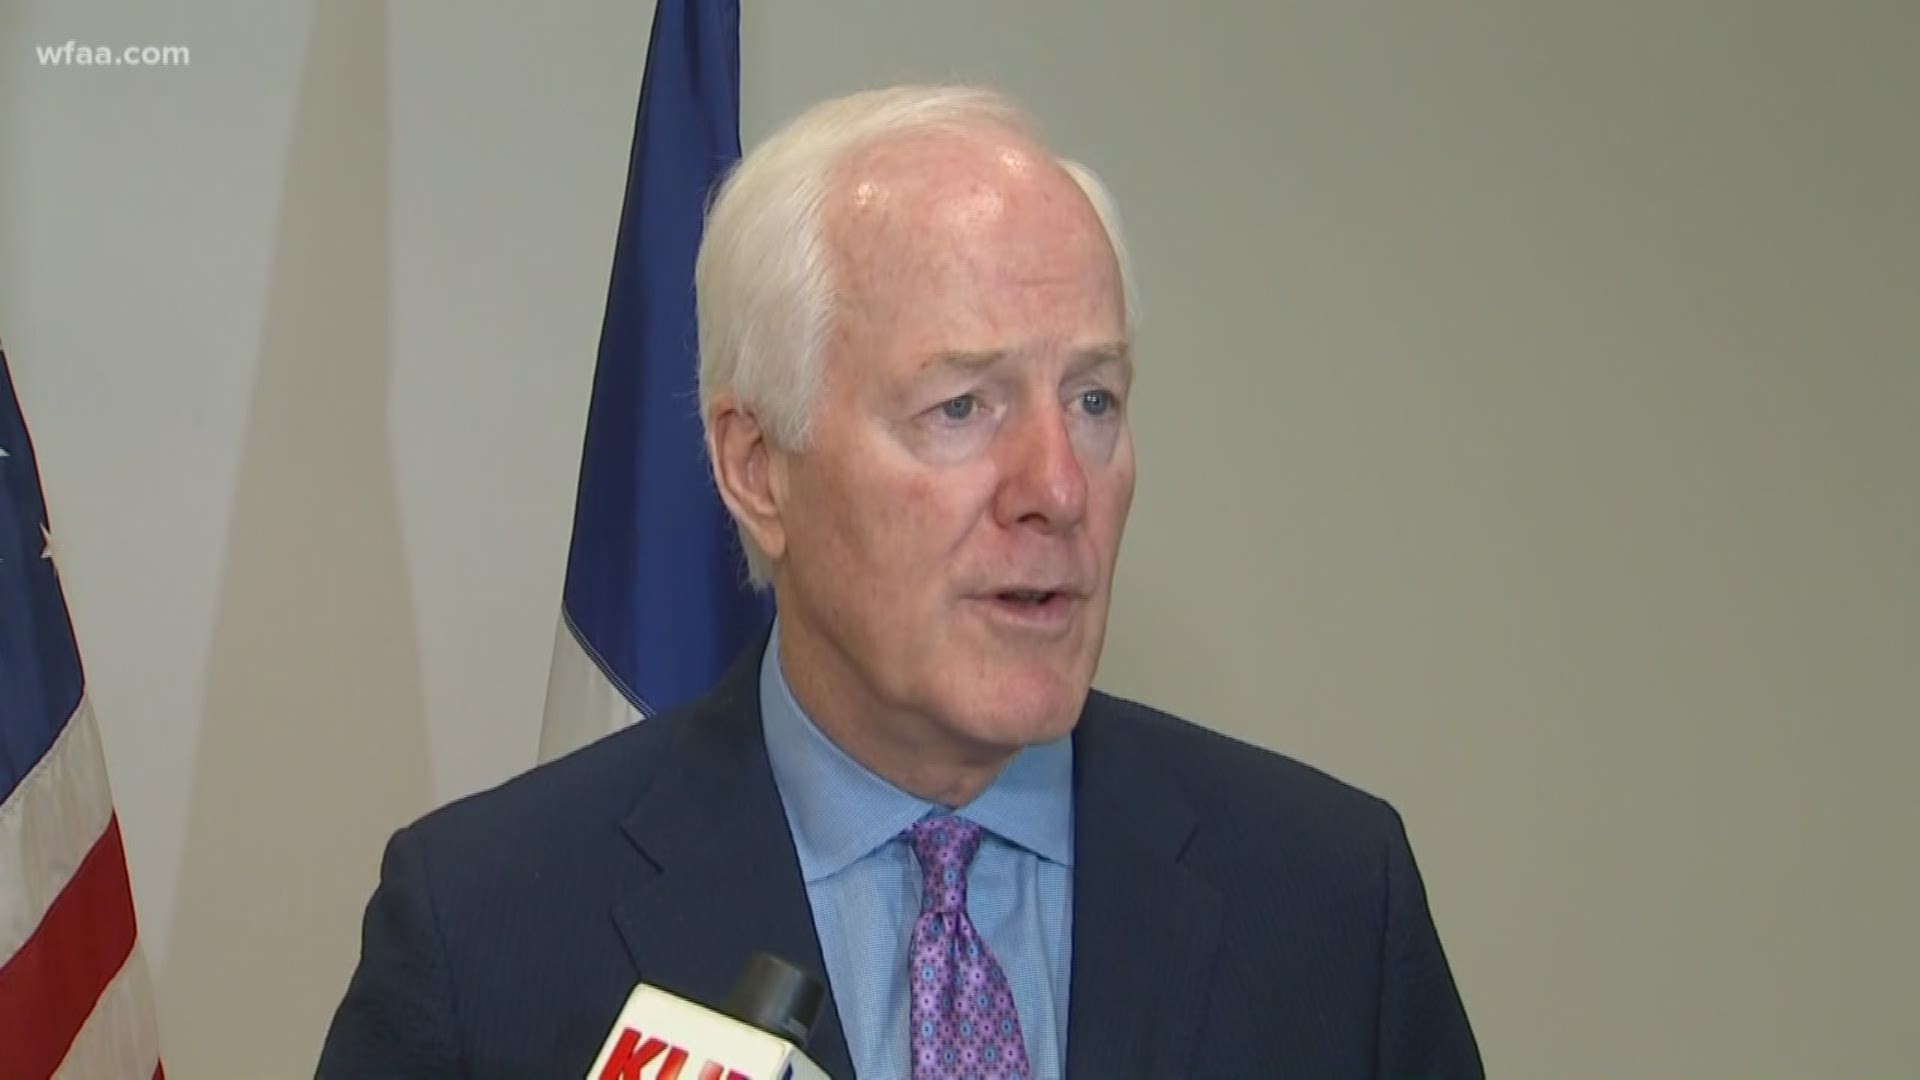 Rep. Allred, Sen. Cornyn spoke to North Texas business leaders about President Donald Trump’s proposal to impose 5% tariffs on Mexican imports.